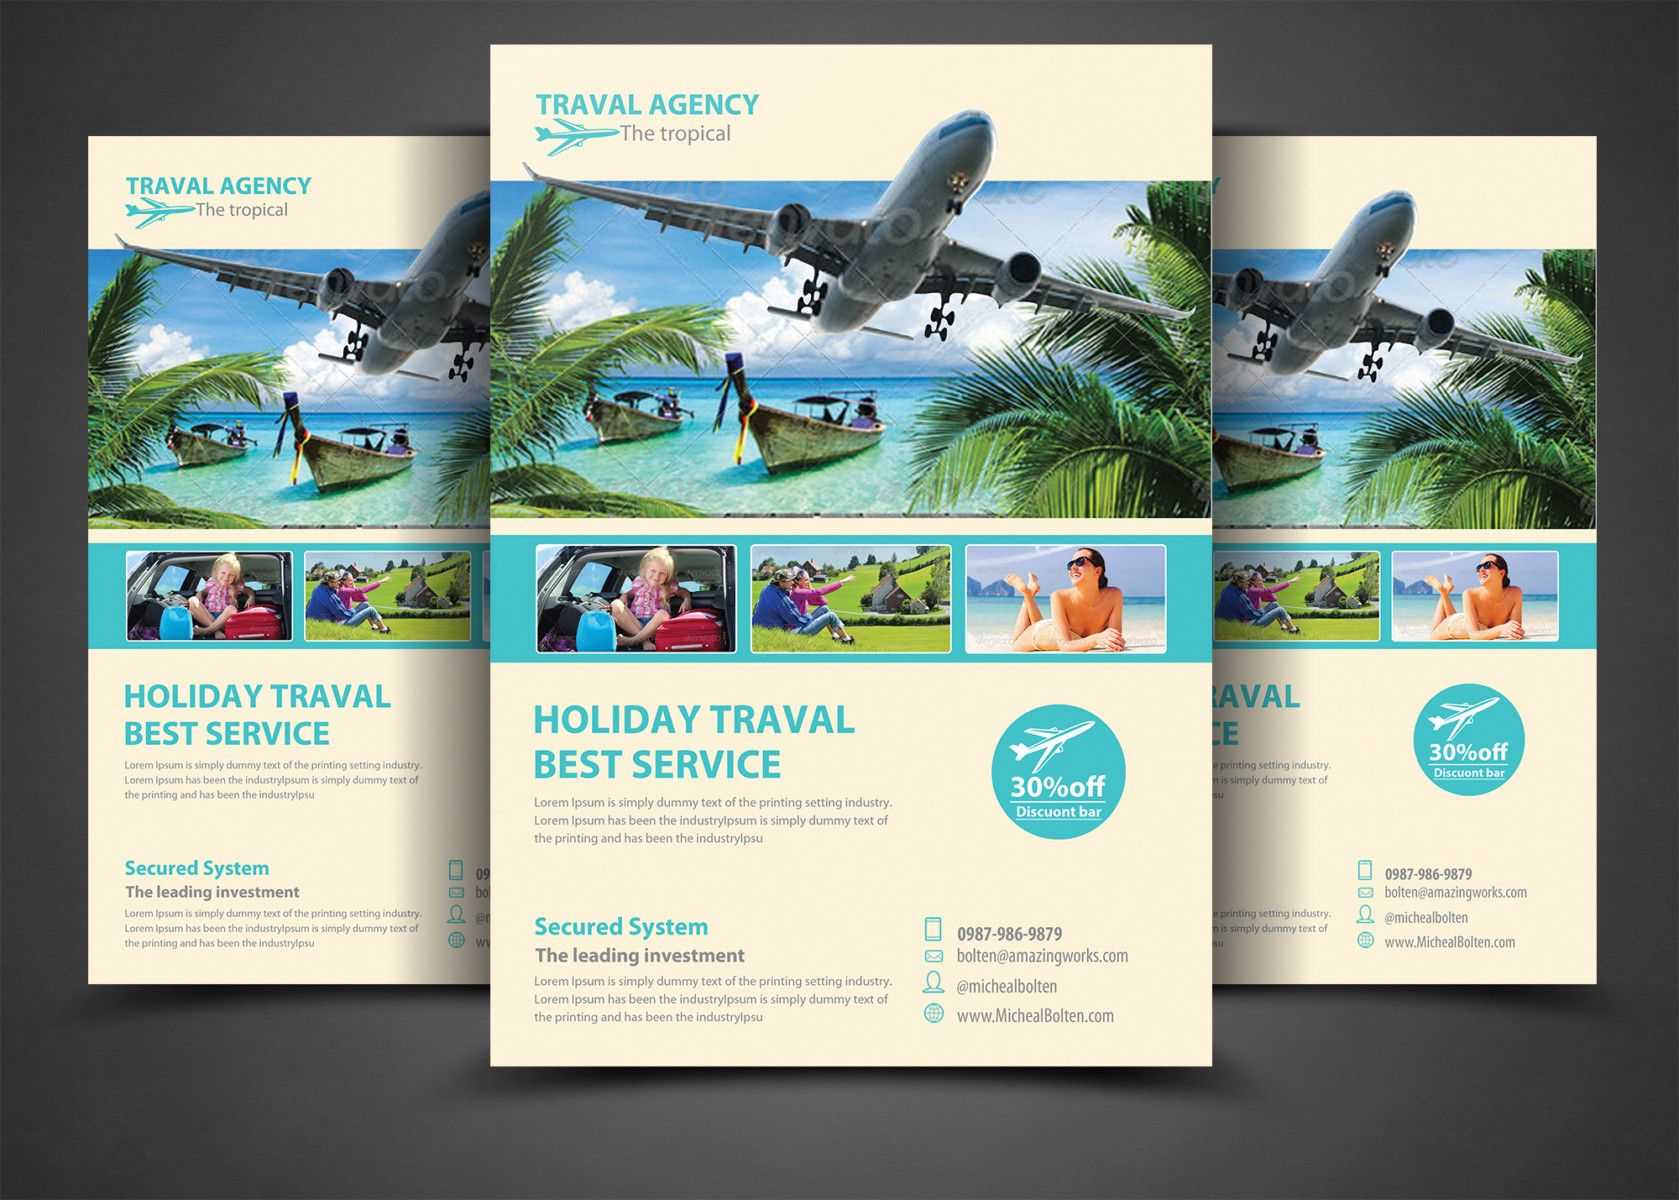 15+ Travel & Tourism Flyer Psd Templates | Tourism Flyers With Regard To Travel And Tourism Brochure Templates Free